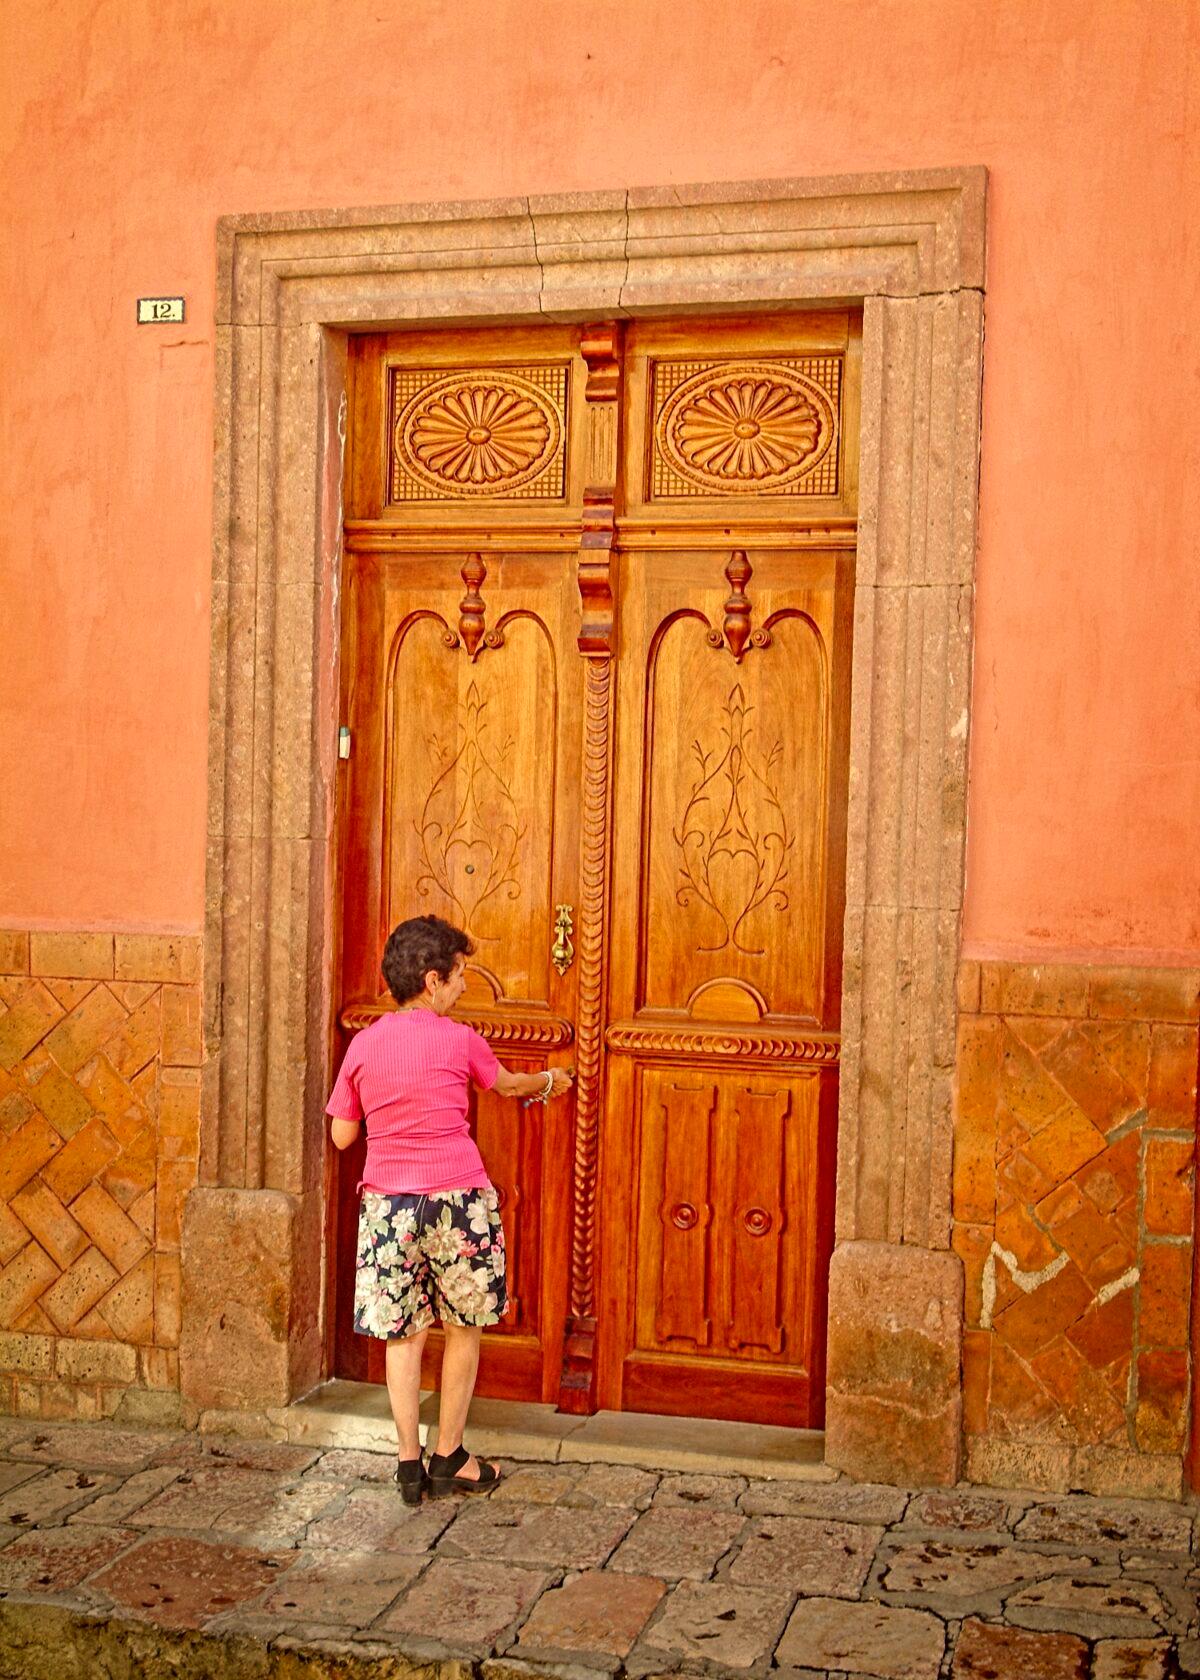 The Spanish colonial era door to this woman’s home in the historic district of San Miguel de Allende is over twice as tall as she is. (Fred J. Eckert)